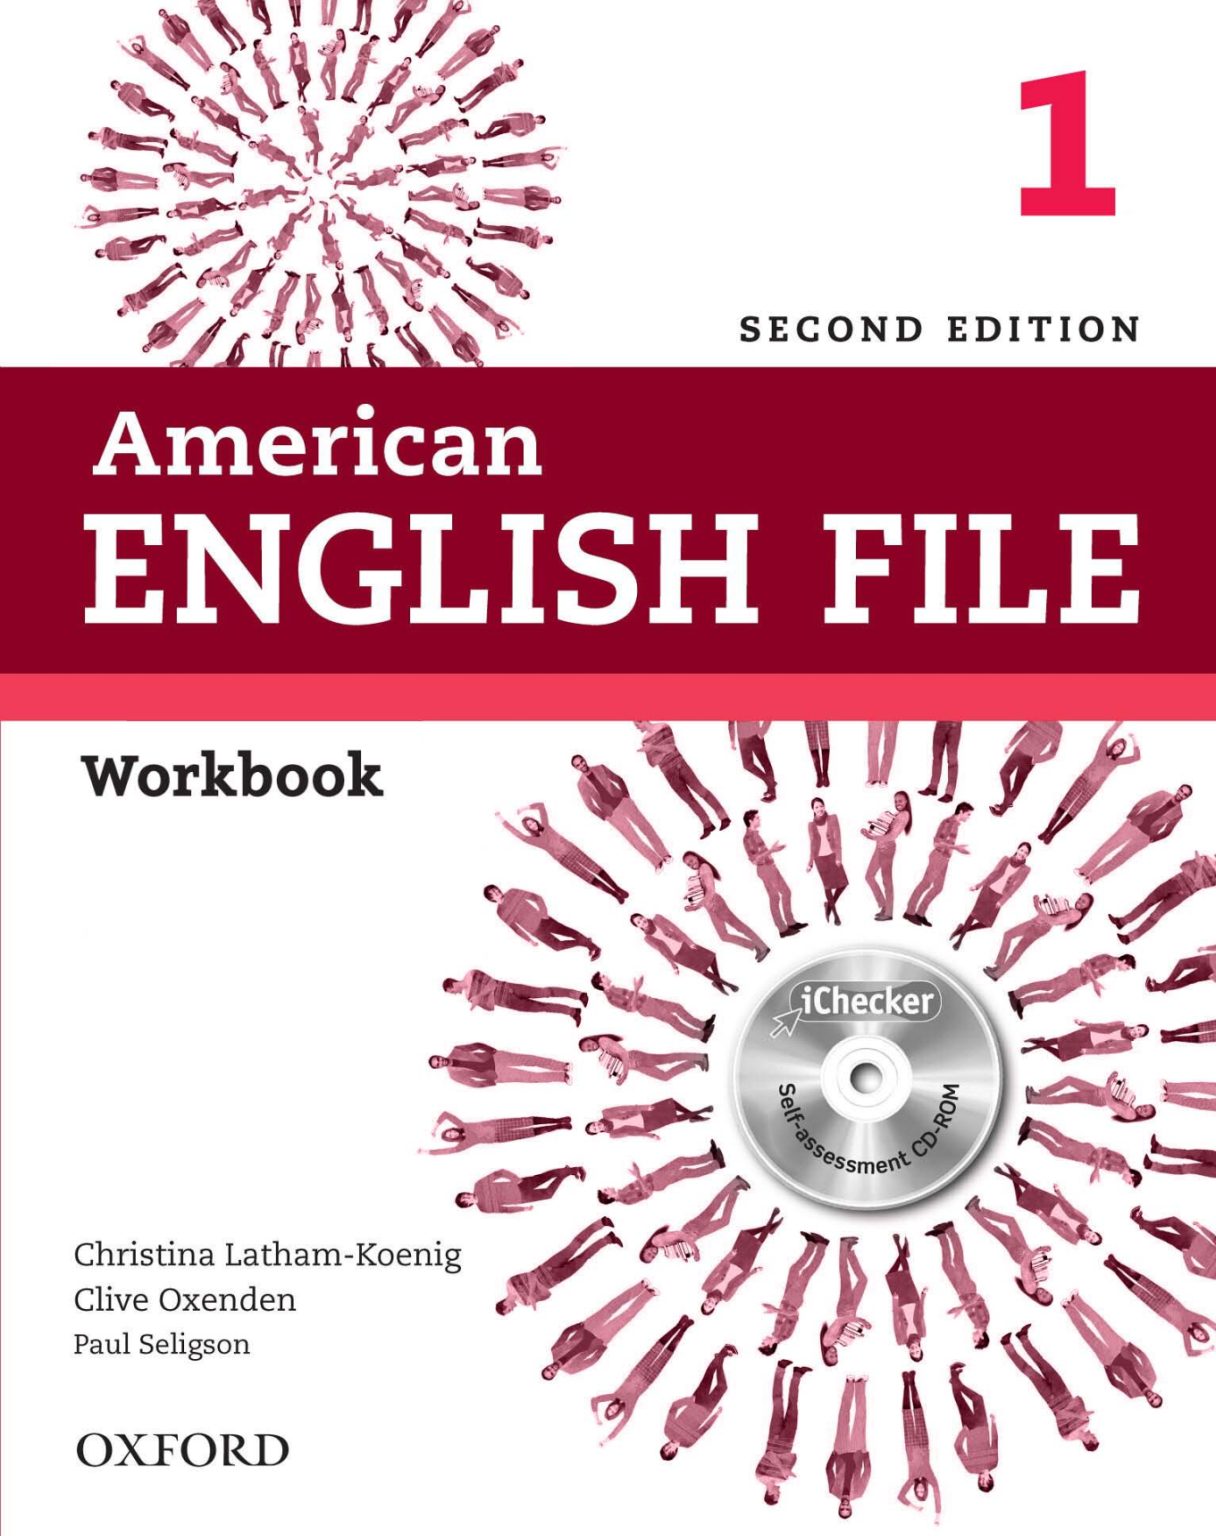 American English Workbook Archives Pdf Library